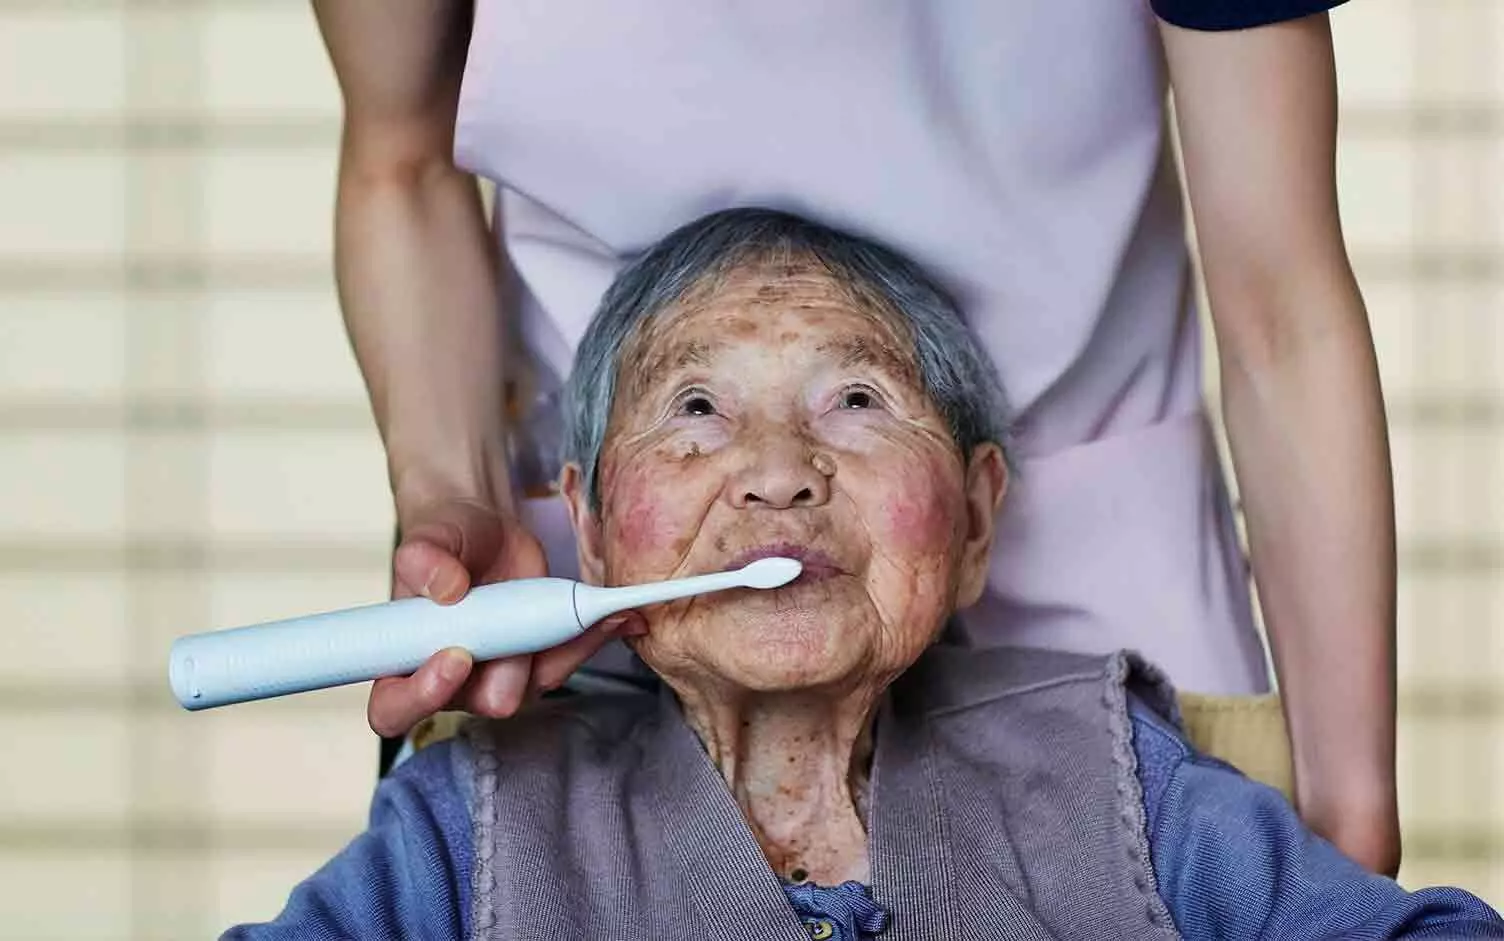 Proxabrush more effective interdental cleaning aid among elderly: Study